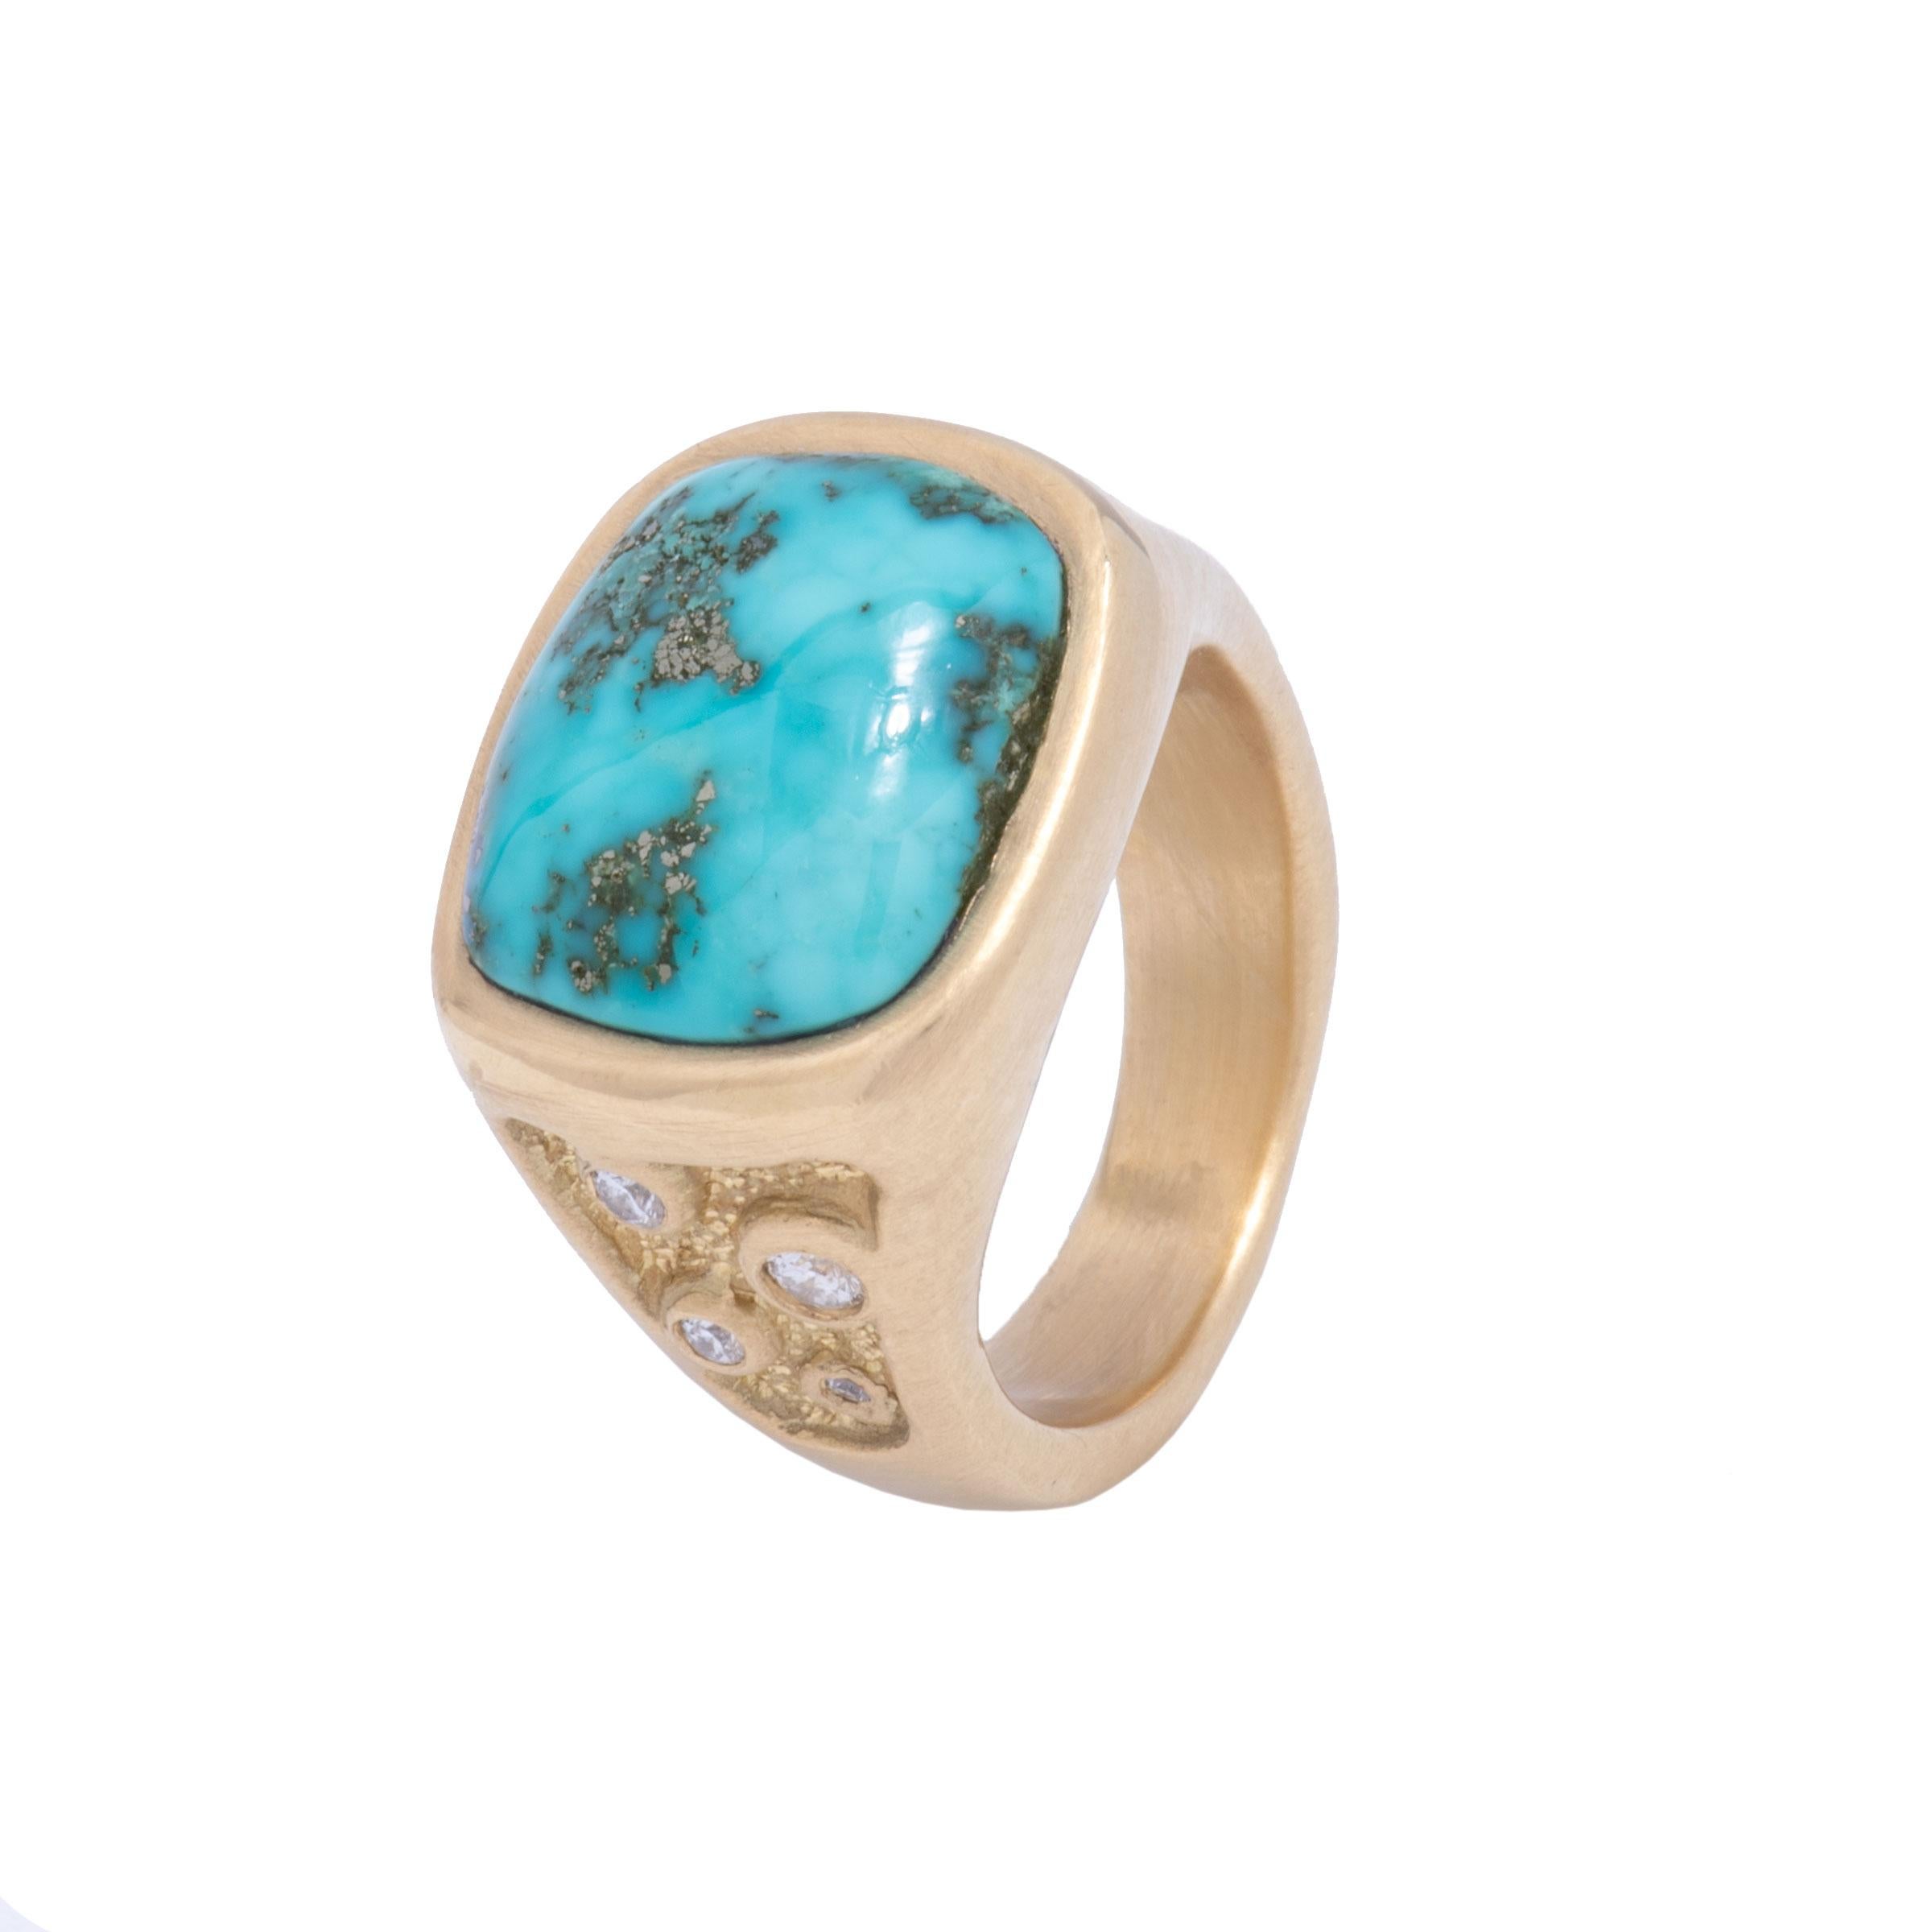 The Morenci Turquoise in this 18 karat signet ring is a magnificent cabochon in deep sky blue with a silvery matrix like an ocean archipelago. A tapering shank is studded with a galaxy of white diamonds .20 tcw and is both textured and smooth. The